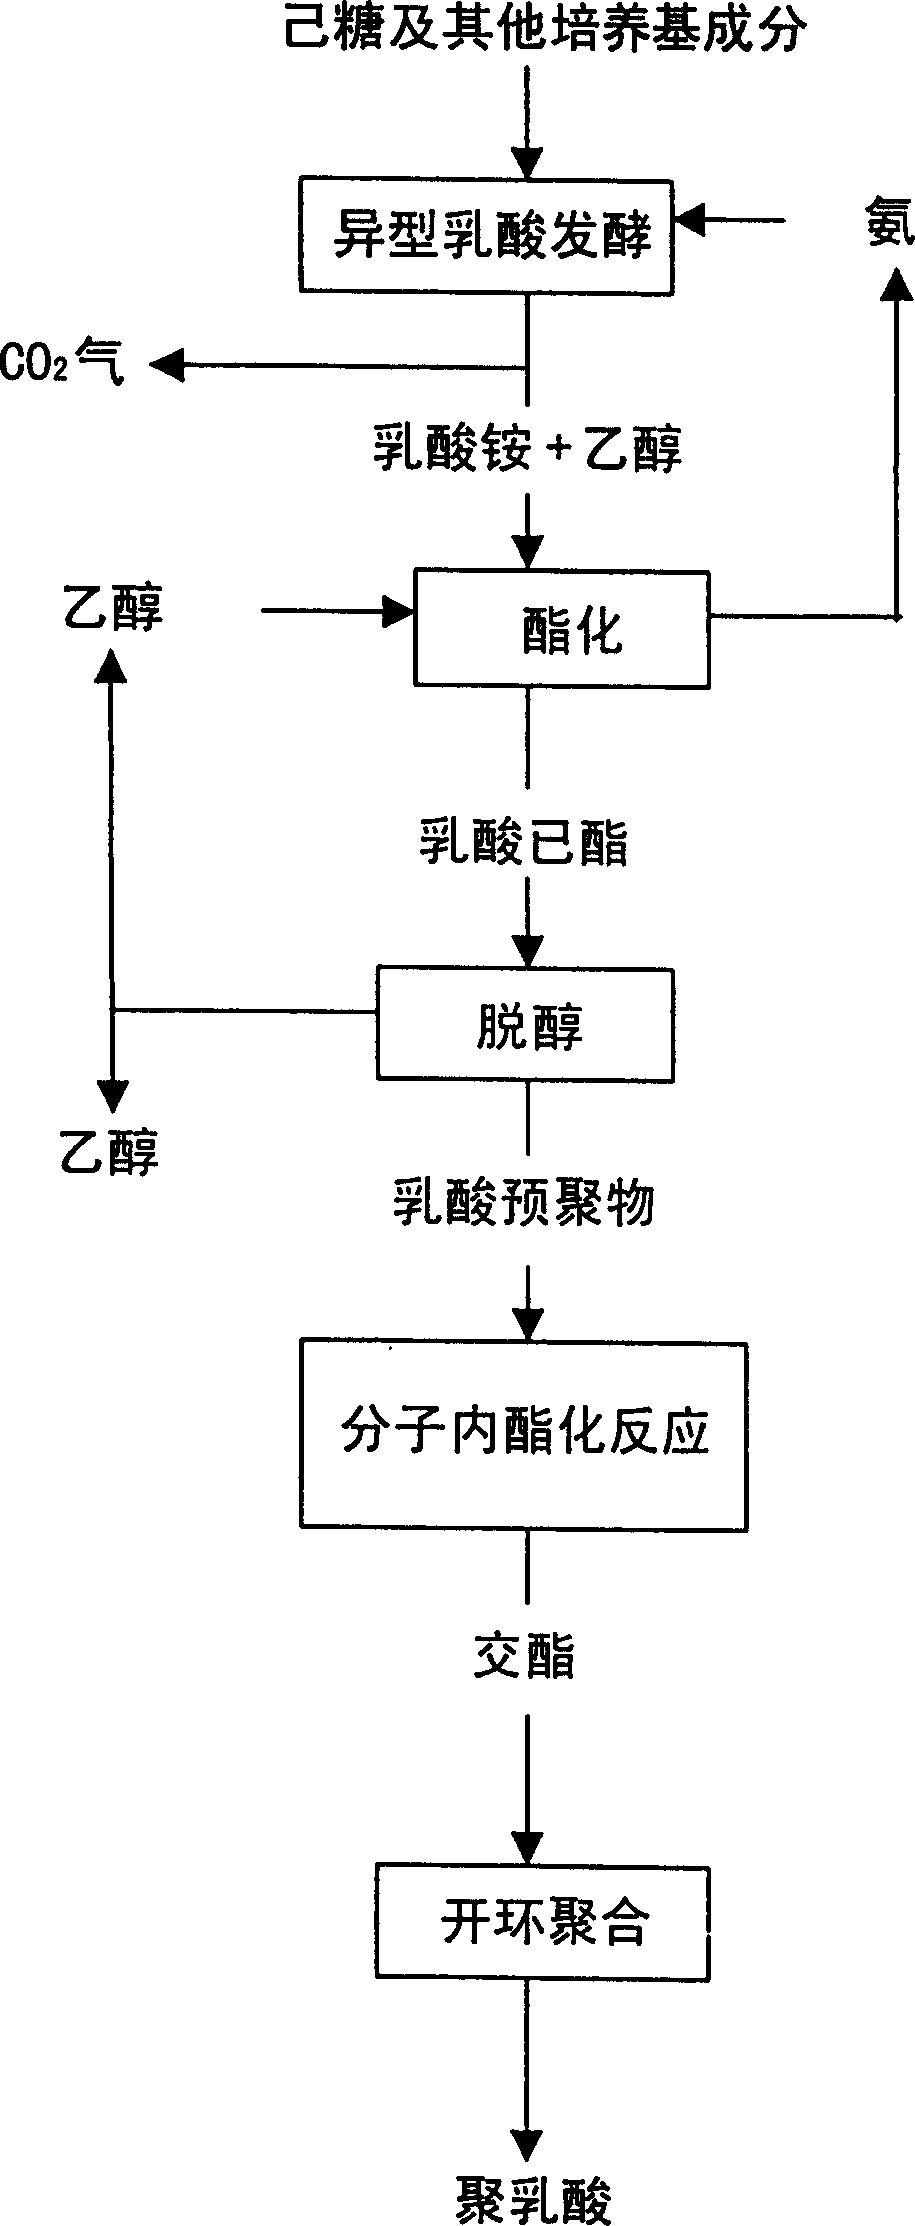 Mfg, Method of cyclic diester using fermented lactic acid as raw materila and method for mfg, polylacgtic acid